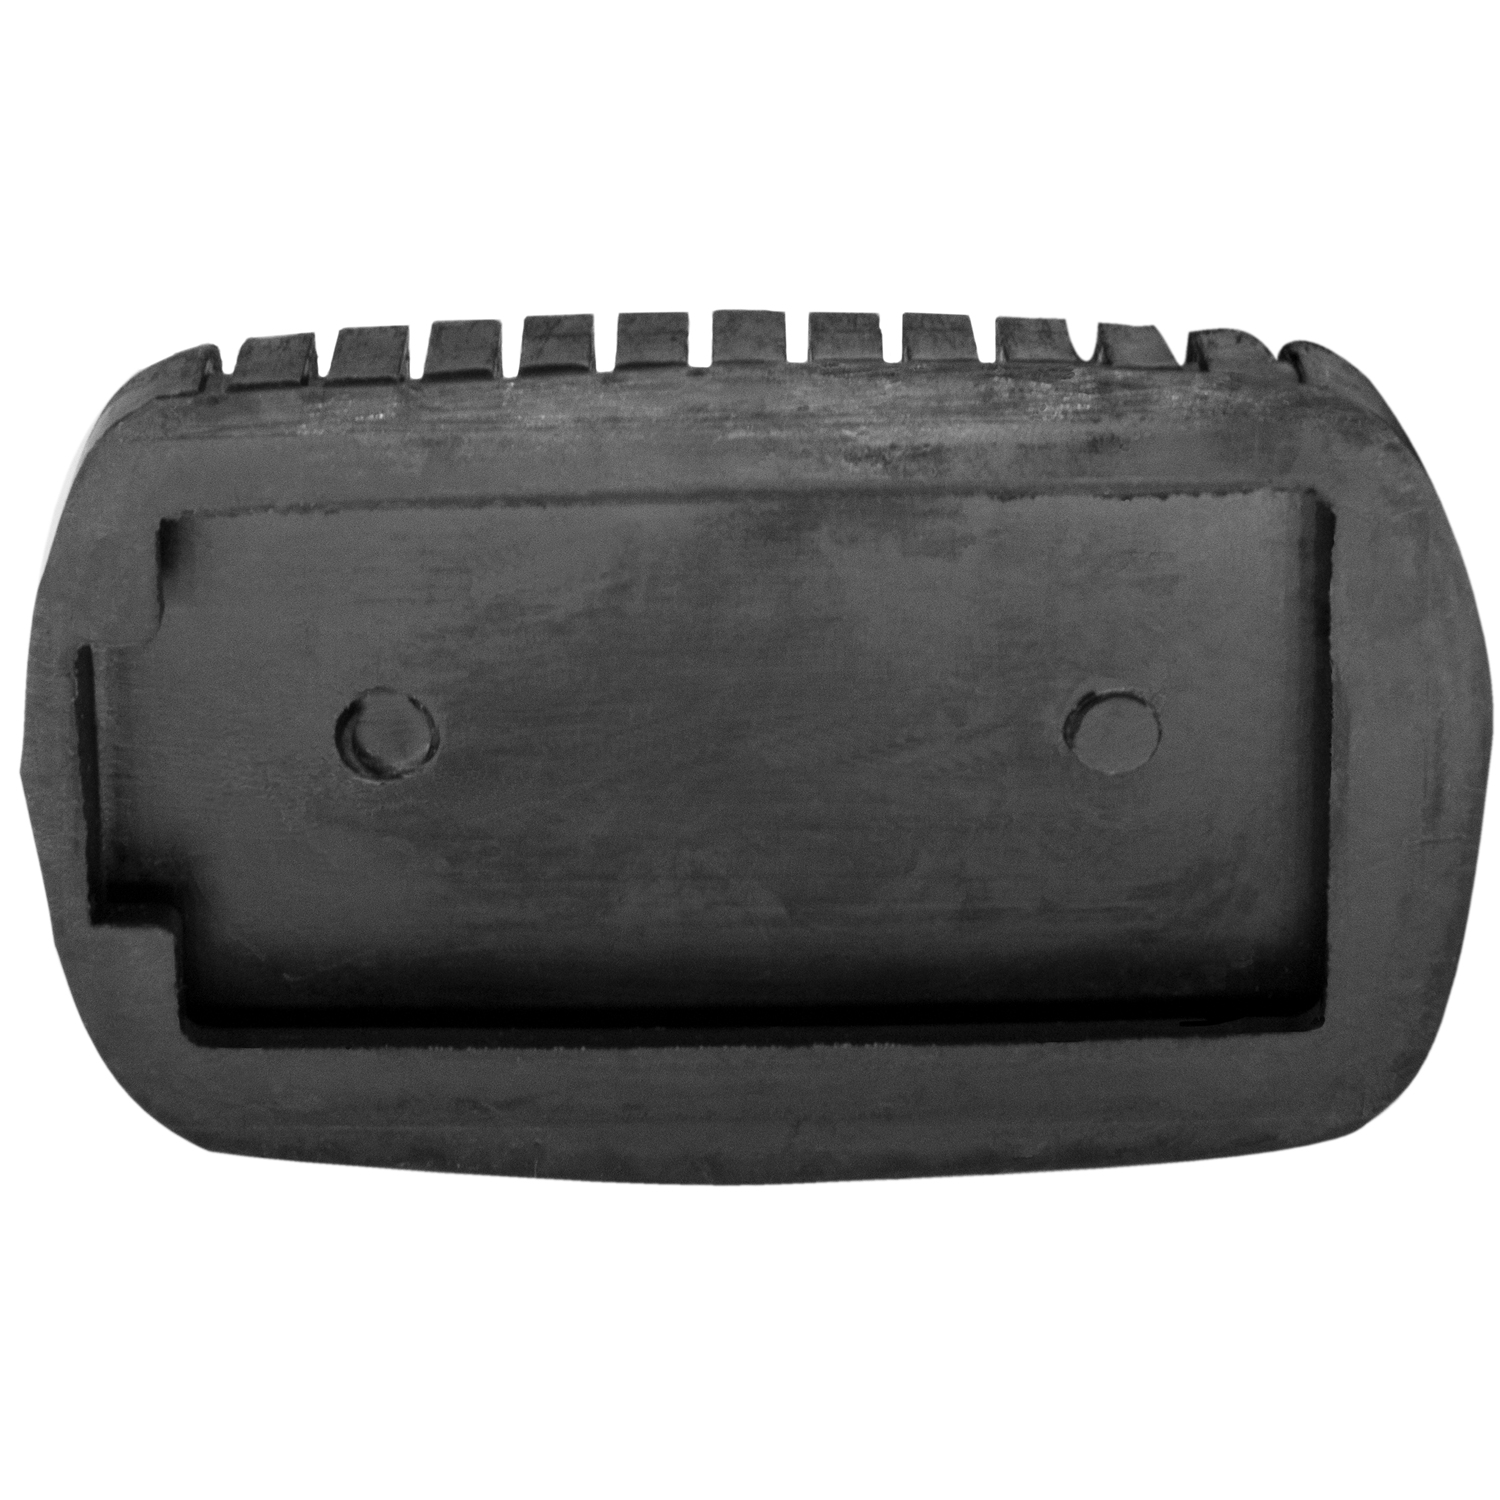 1953 Chevrolet Truck Clutch and Brake Pedal Pad.  2-1/2 wide X 3-7/8 long-CB 100-A/EA